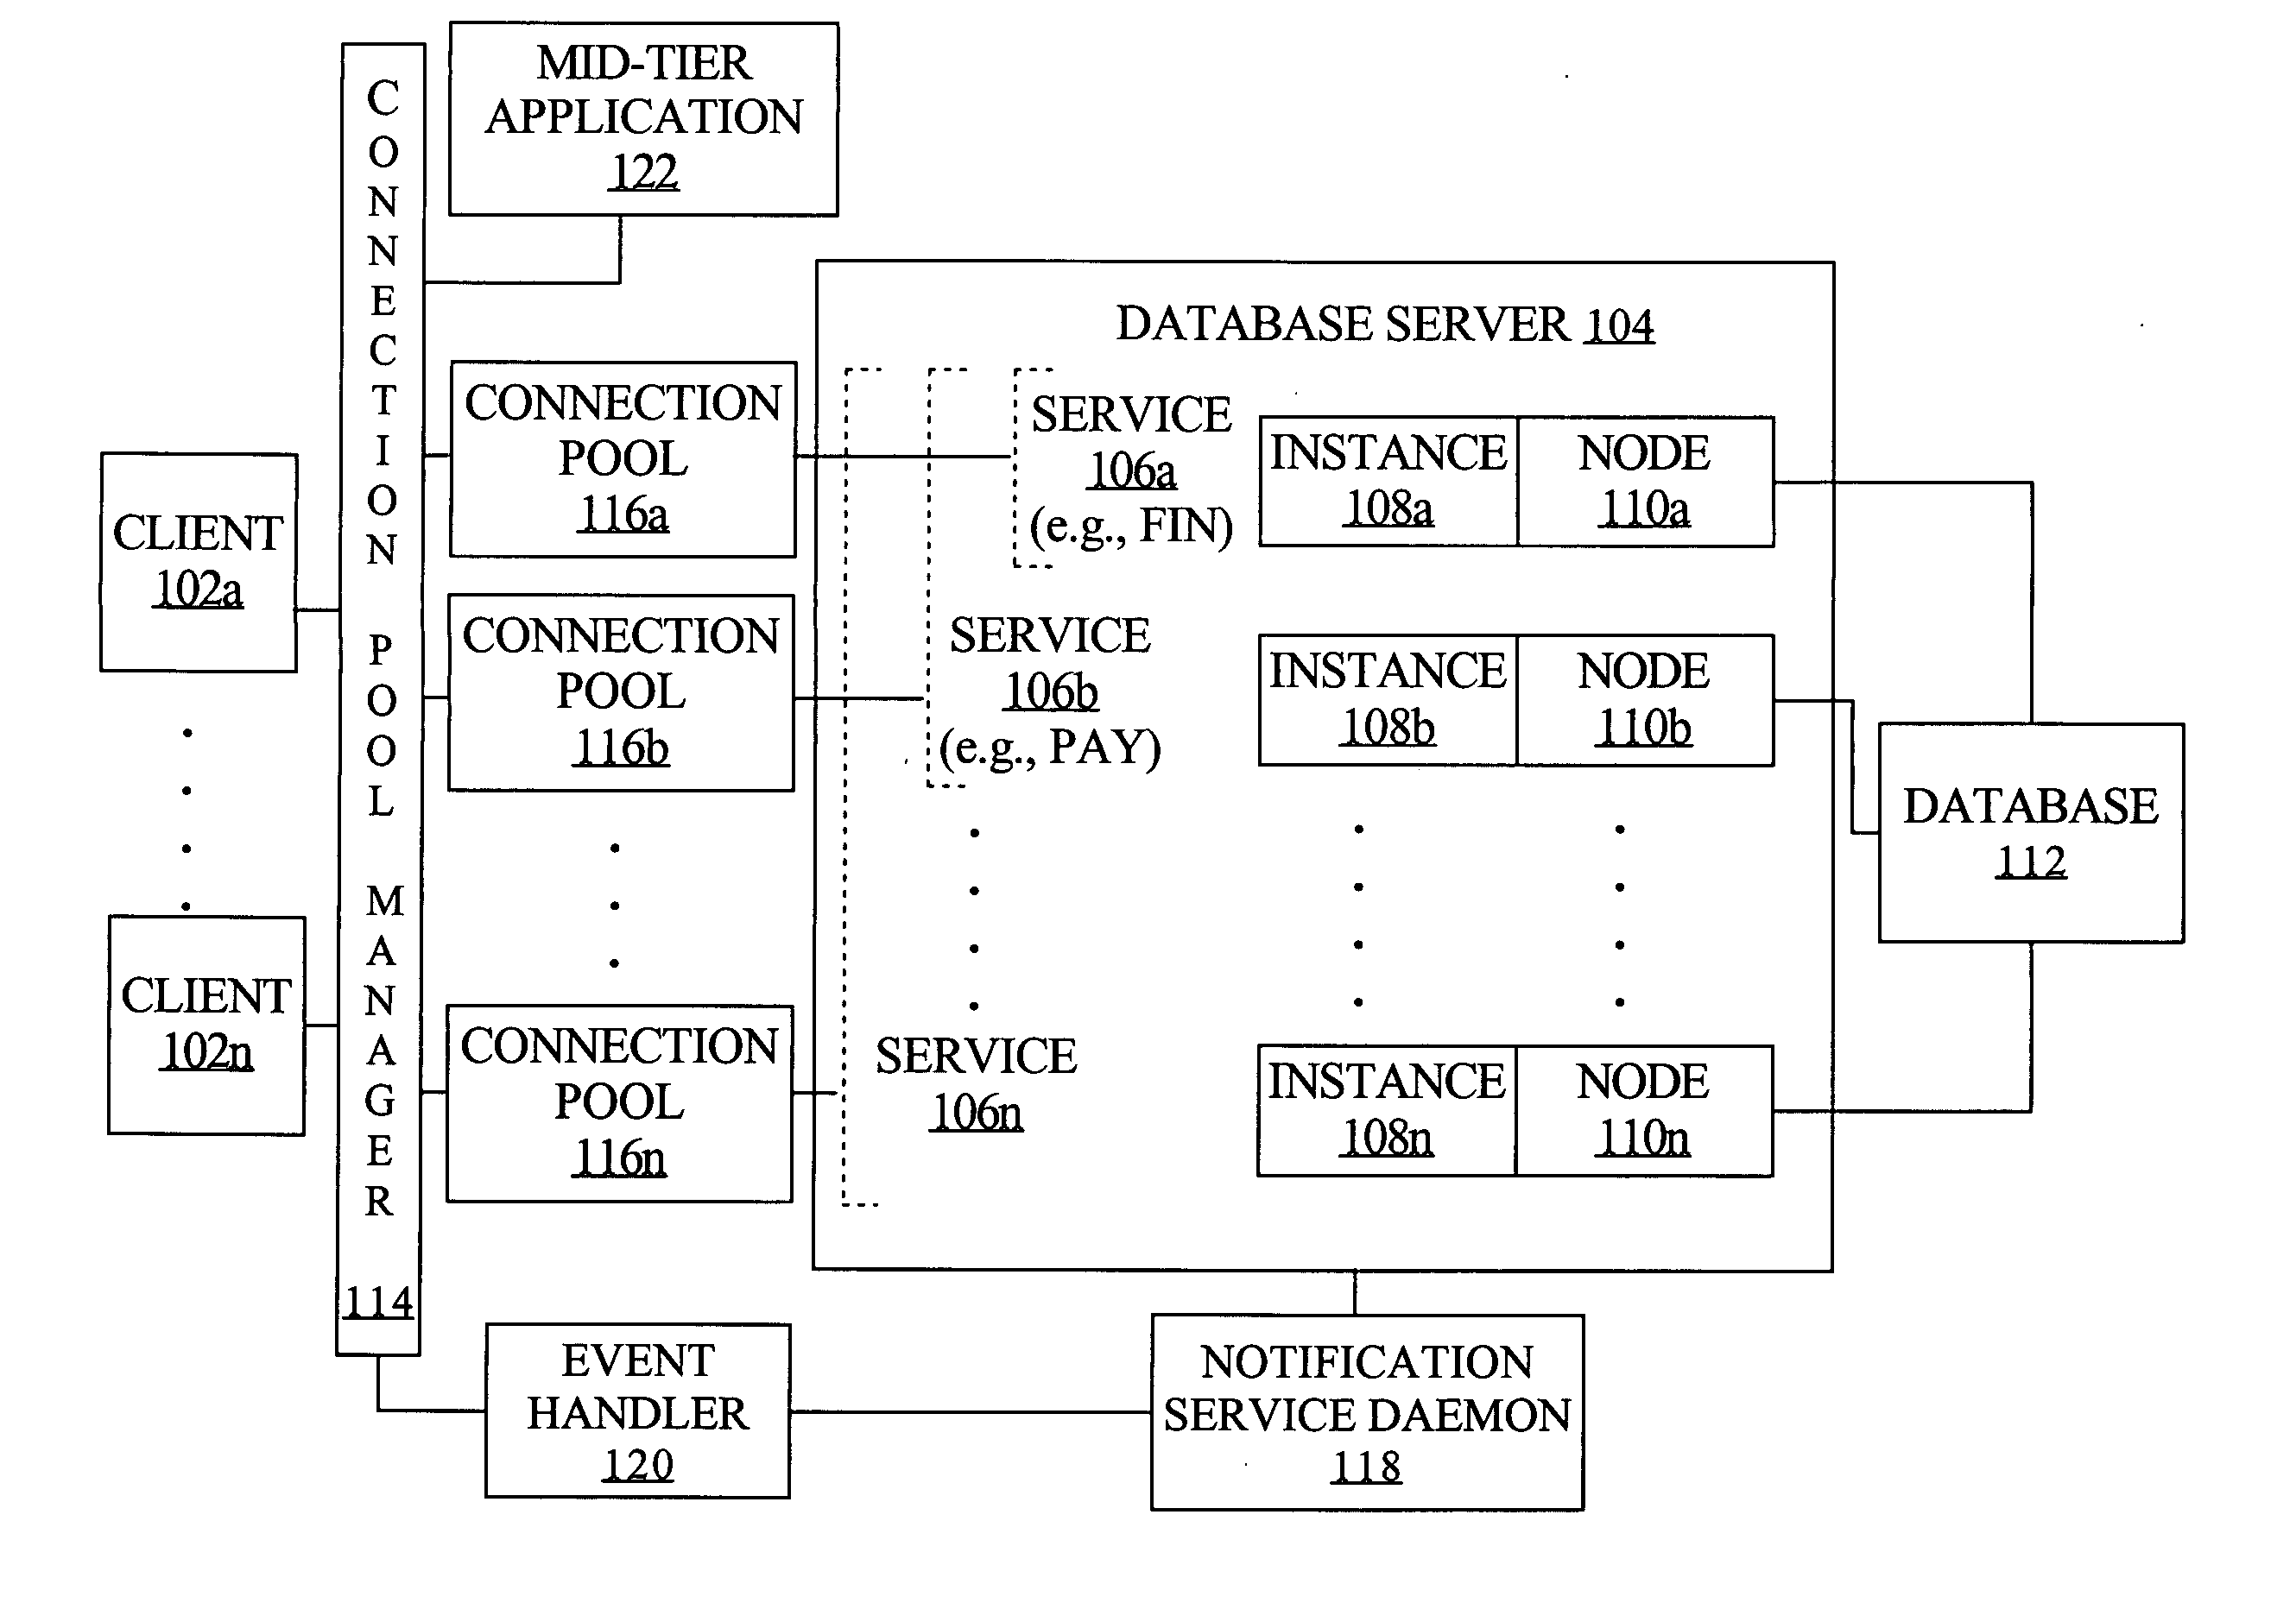 Connection pool use of runtime load balancing service performance advisories